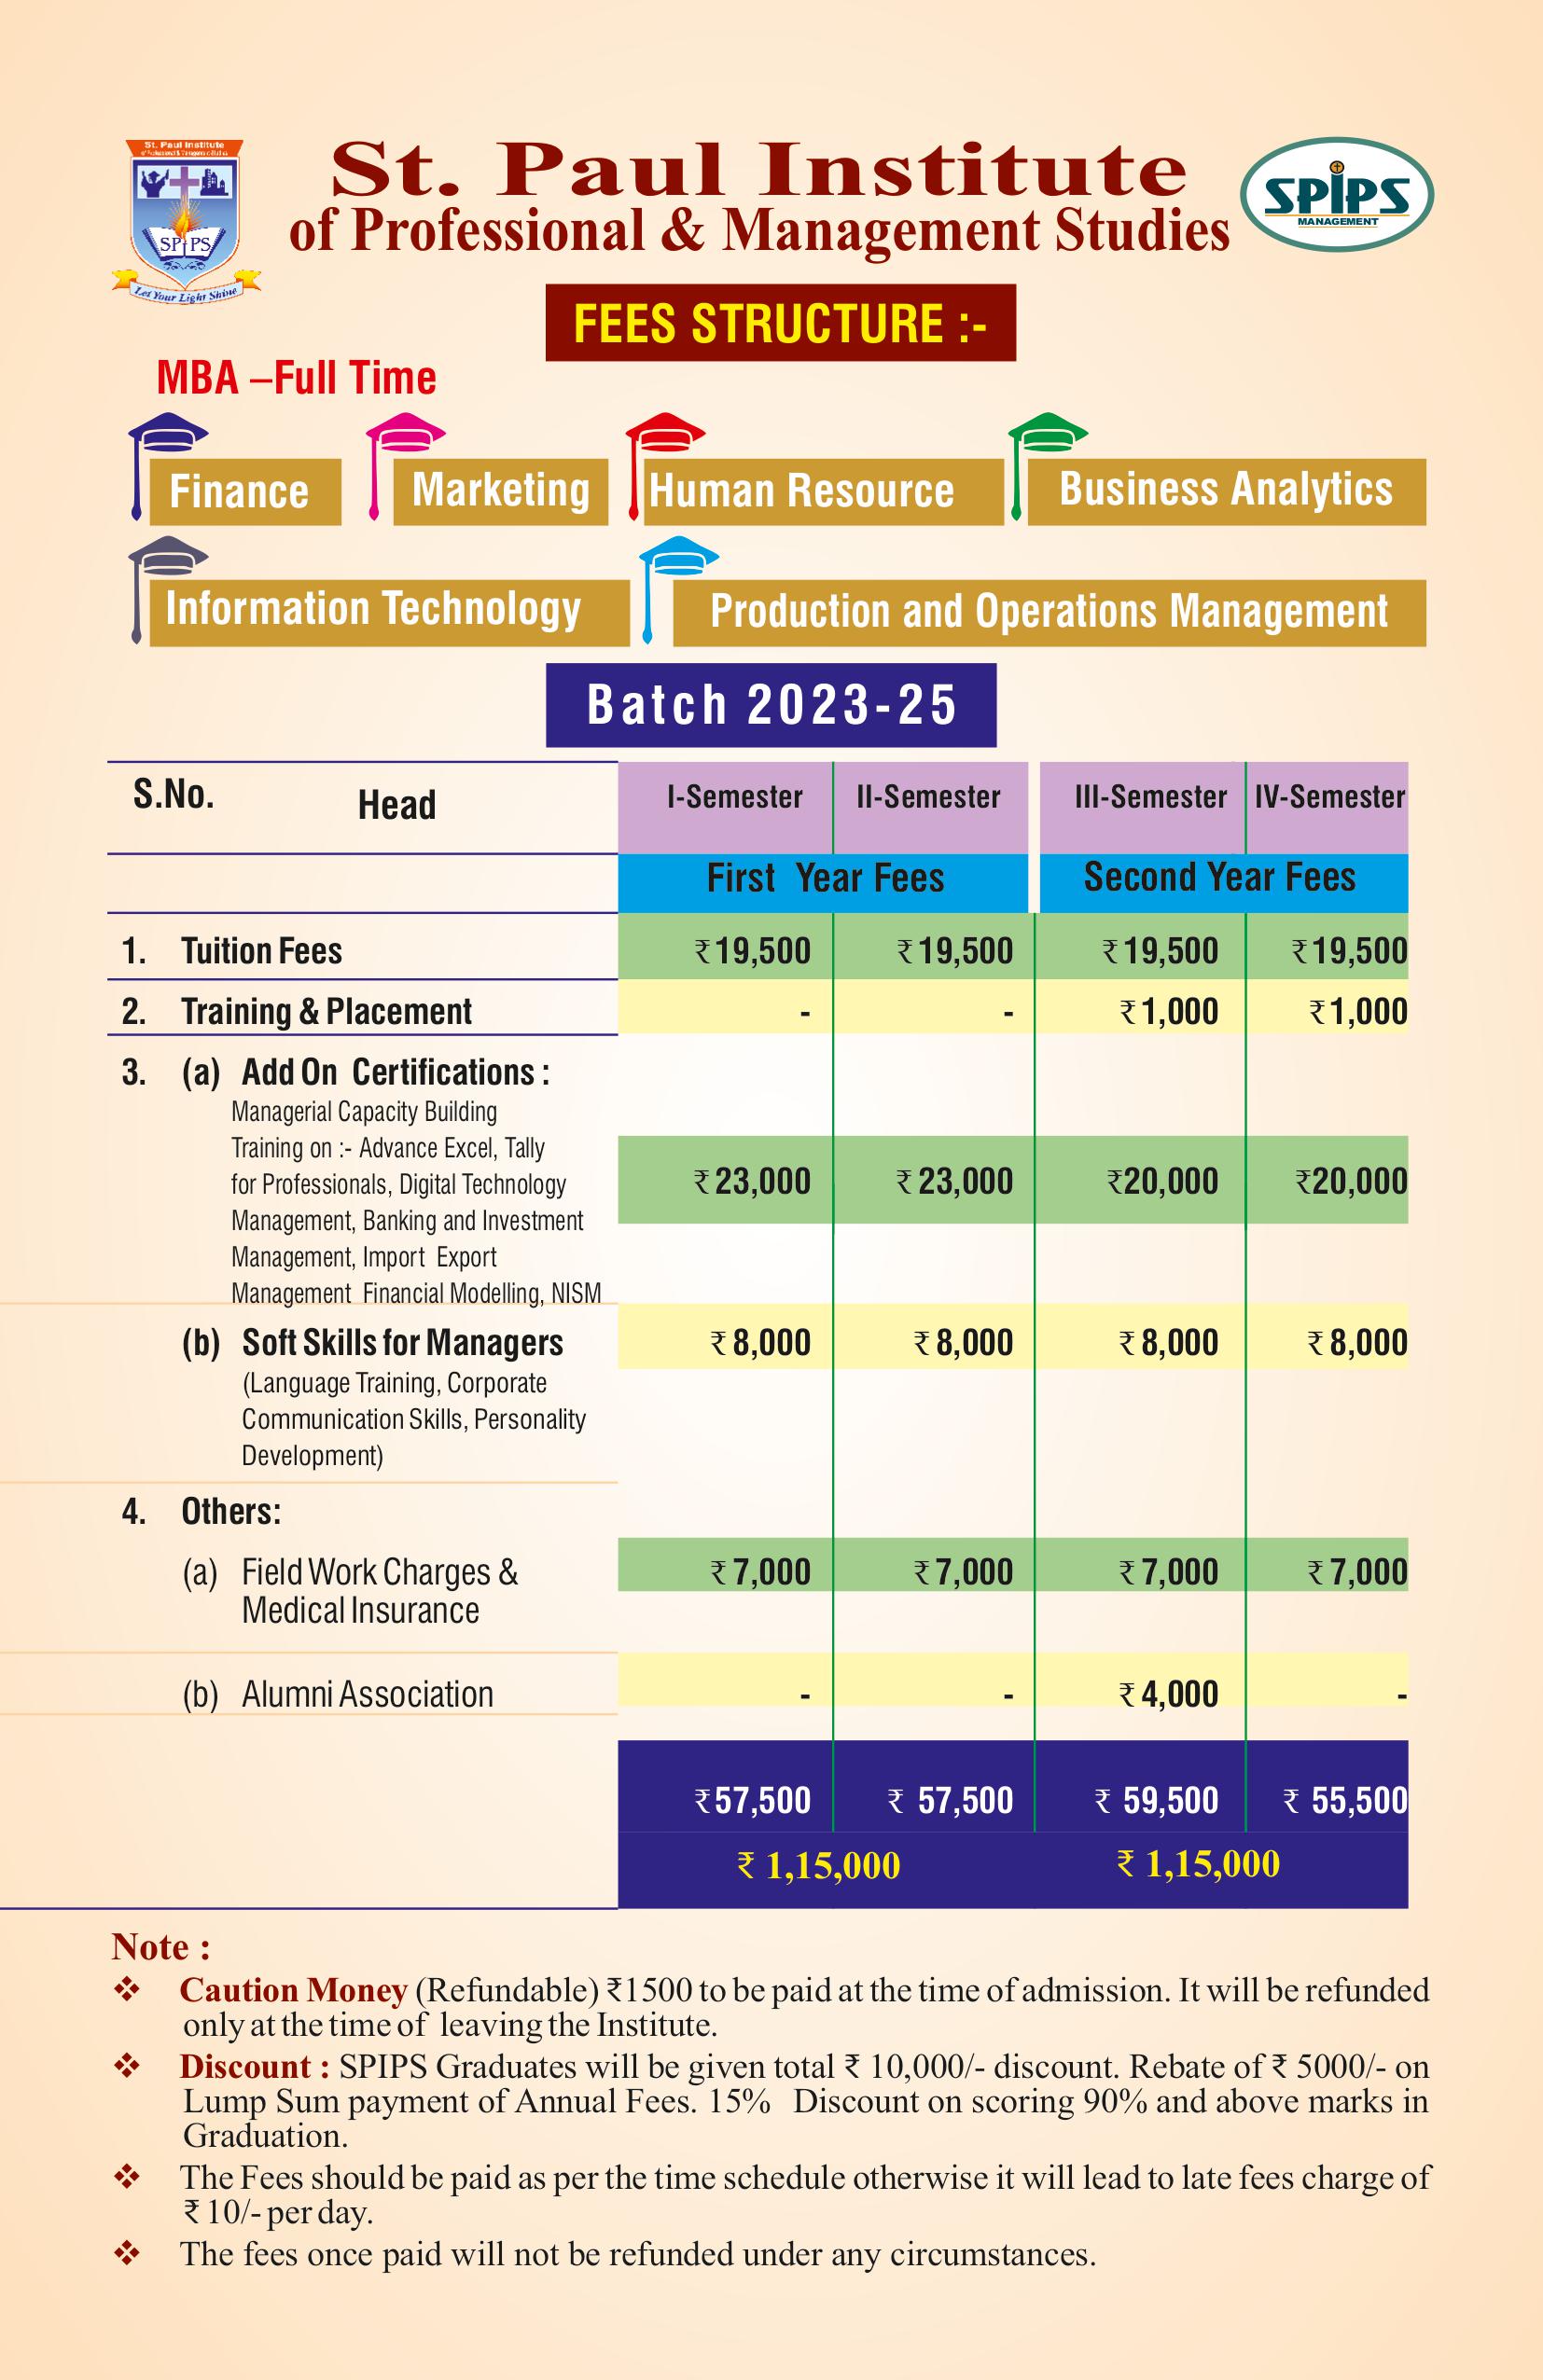 Fee Structure for MBA